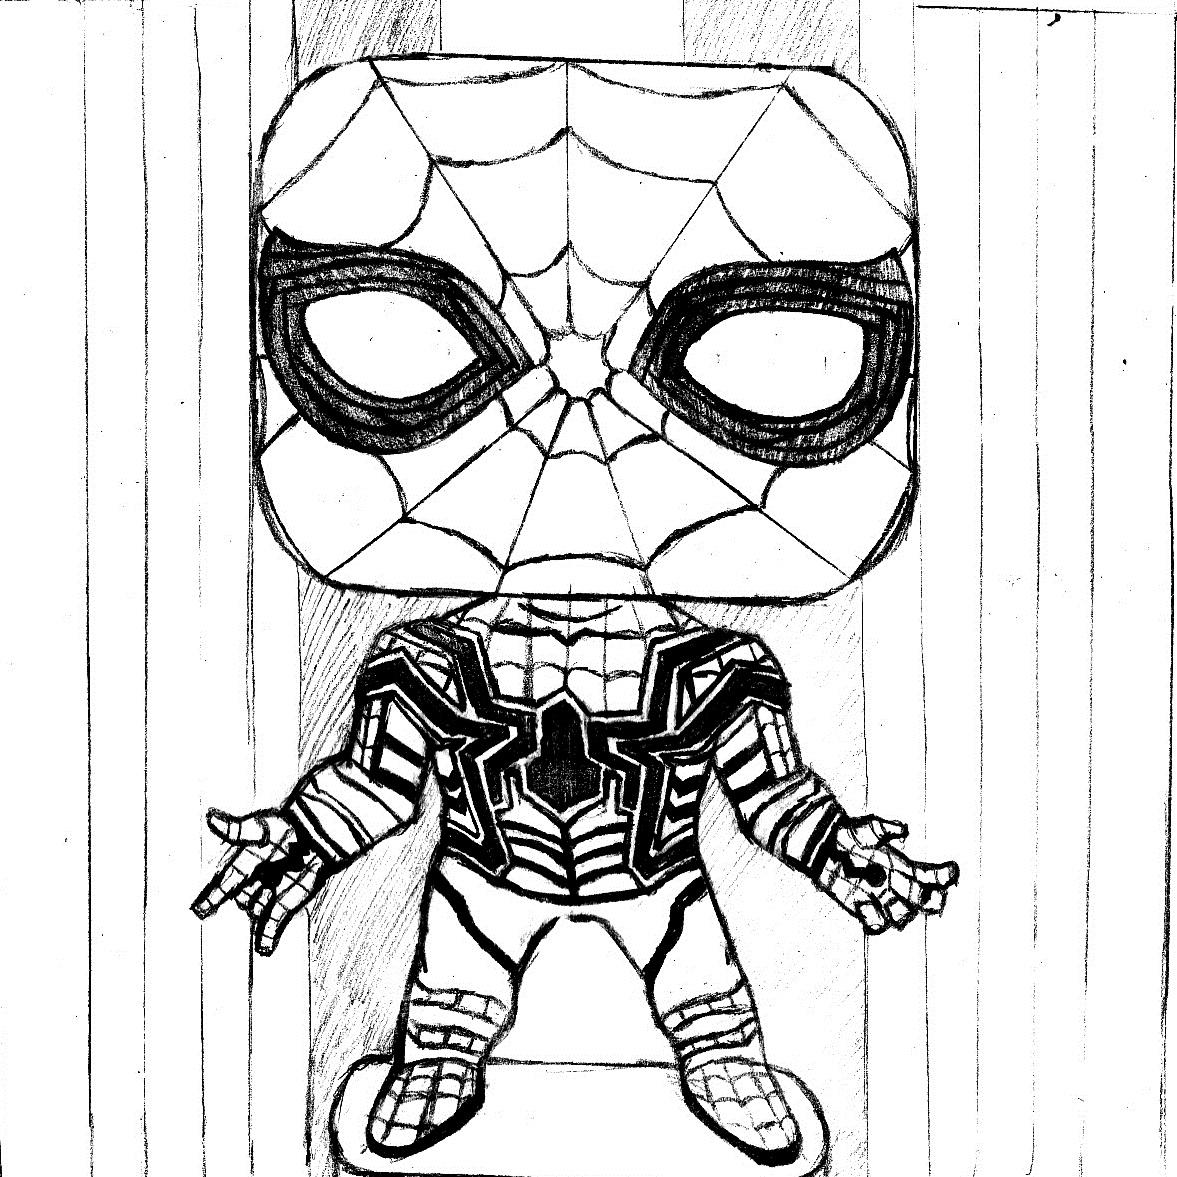 Spiderman Black Suit Drawing at GetDrawings.com | Free for ...